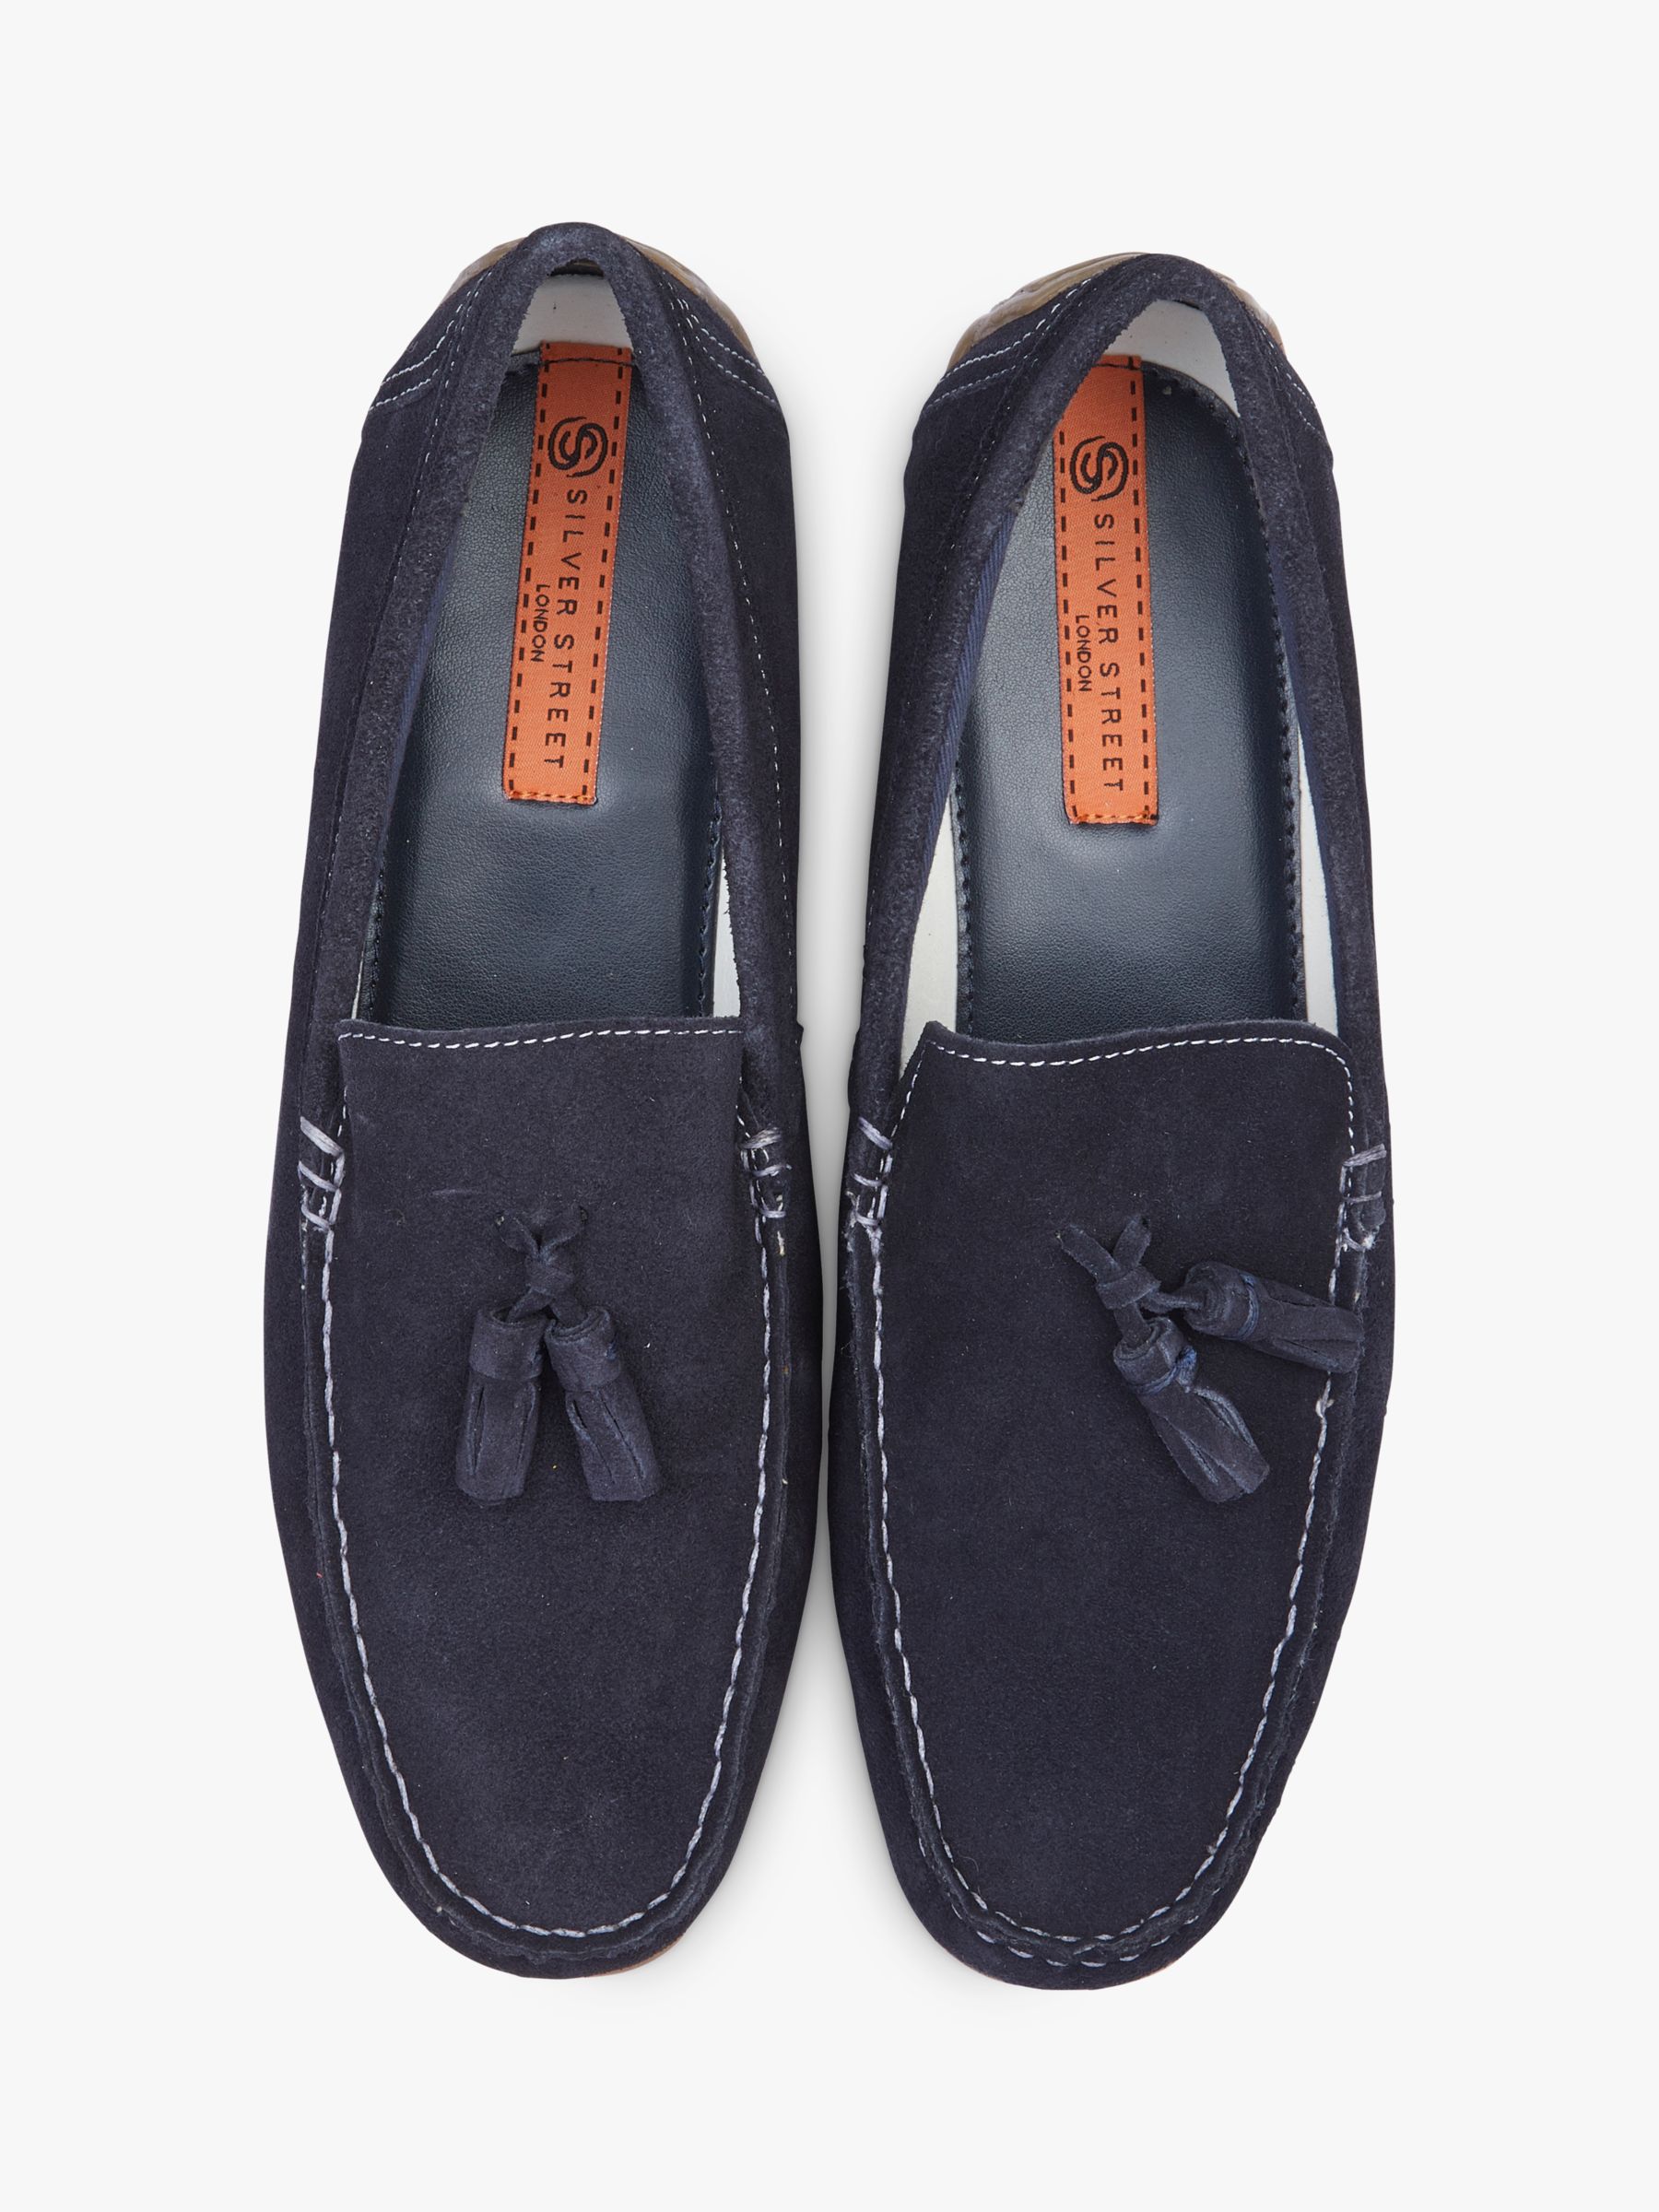 Silver Street London Monza Suede Loafers, Navy at John Lewis & Partners